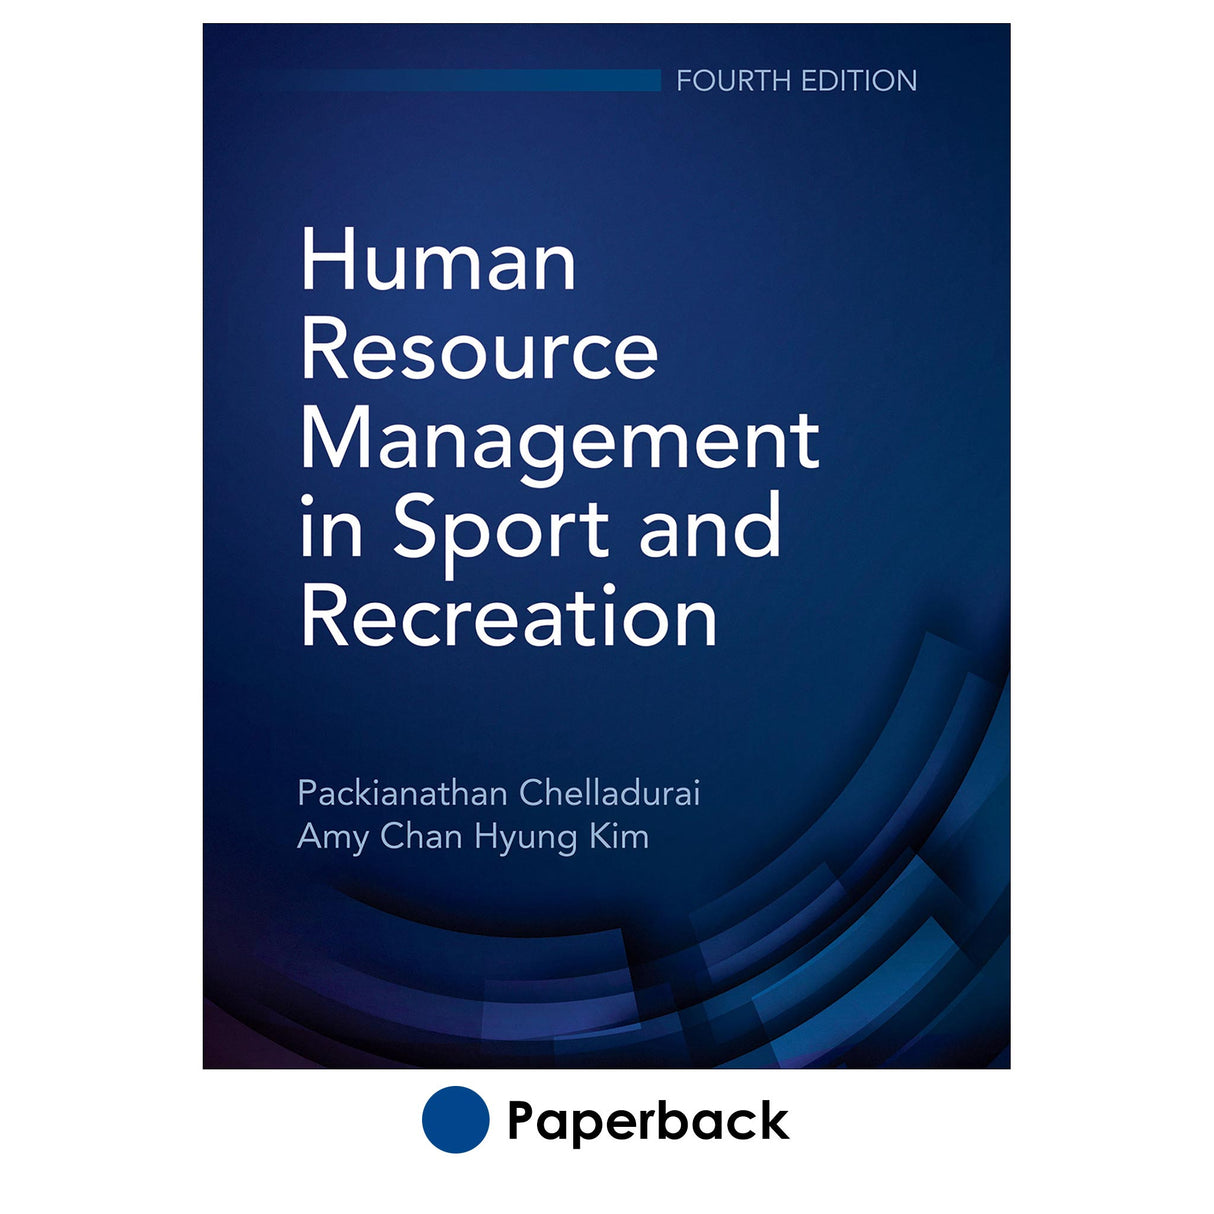 Human Resource Management in Sport and Recreation-4th Edition